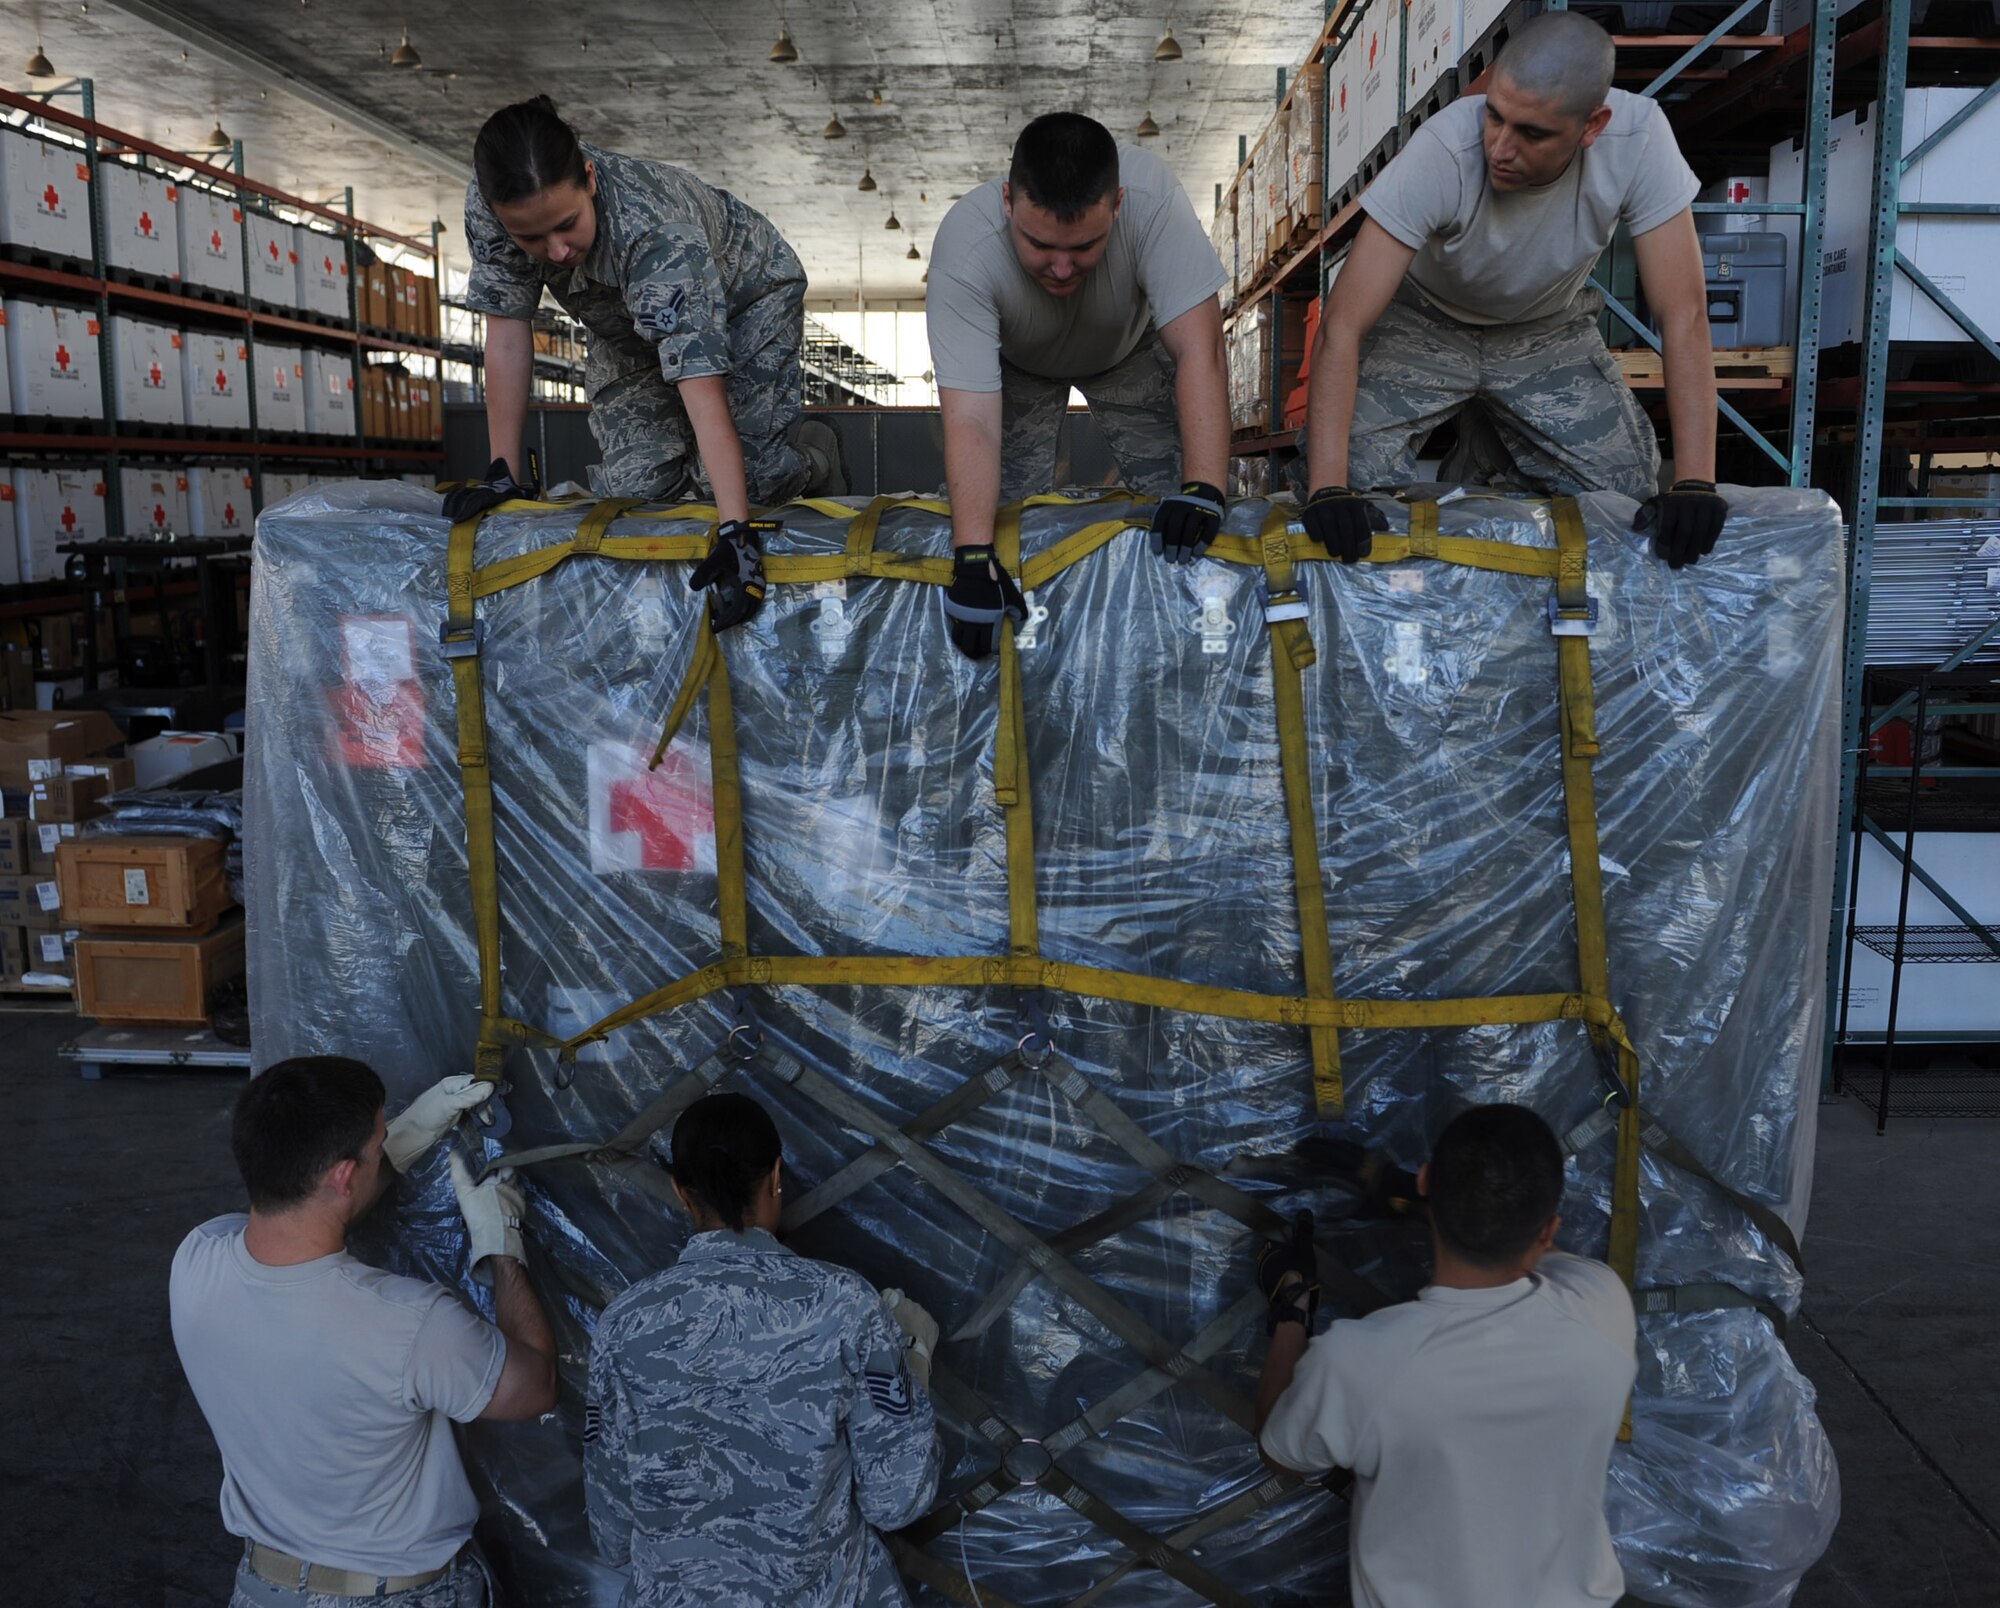 Members of the 15th Medical Logistics flight assemble a pallet in Hangar 4 during a 15th Medical Group training day session July 19 at Joint Base Pearl Harbor-Hickam, Hawaii. The flight is responsible for ordering, storing and distributing medical supplies to 15th Medical Group clinics as well as storing and preparing medical supplies for contingency and deployment operations. (U.S. Air Force photo by Staff Sgt. Nathan Allen)